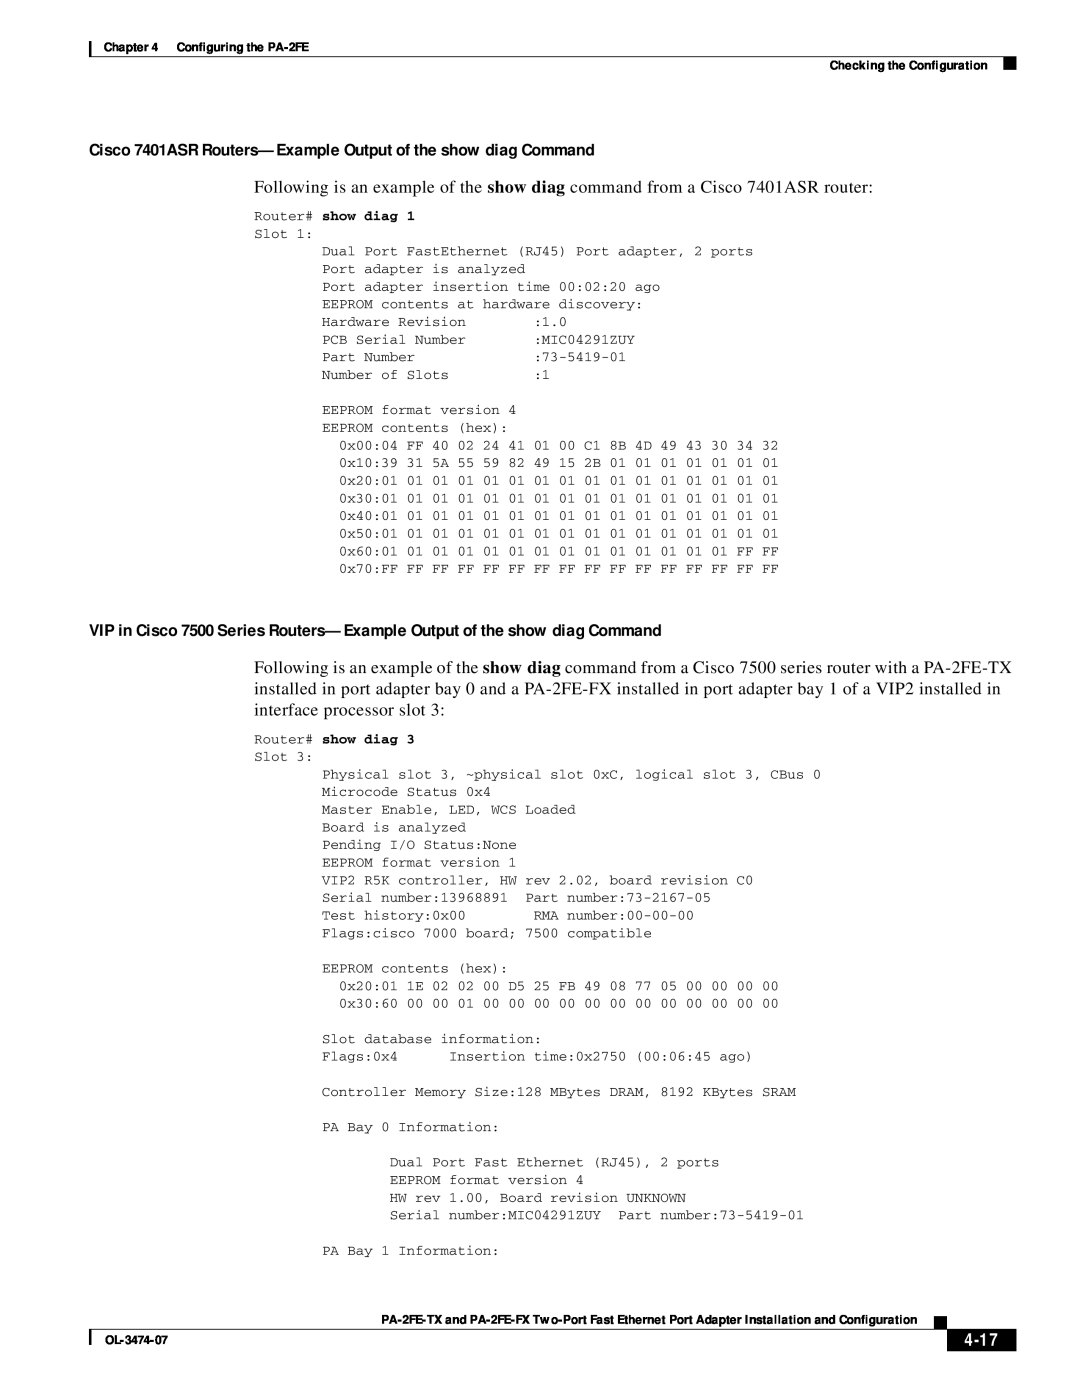 Cisco Systems PA-2FE-FX, PA-2FE-TX manual Cisco 7401ASR Routers-Example Output of the show diag Command, 4-17 